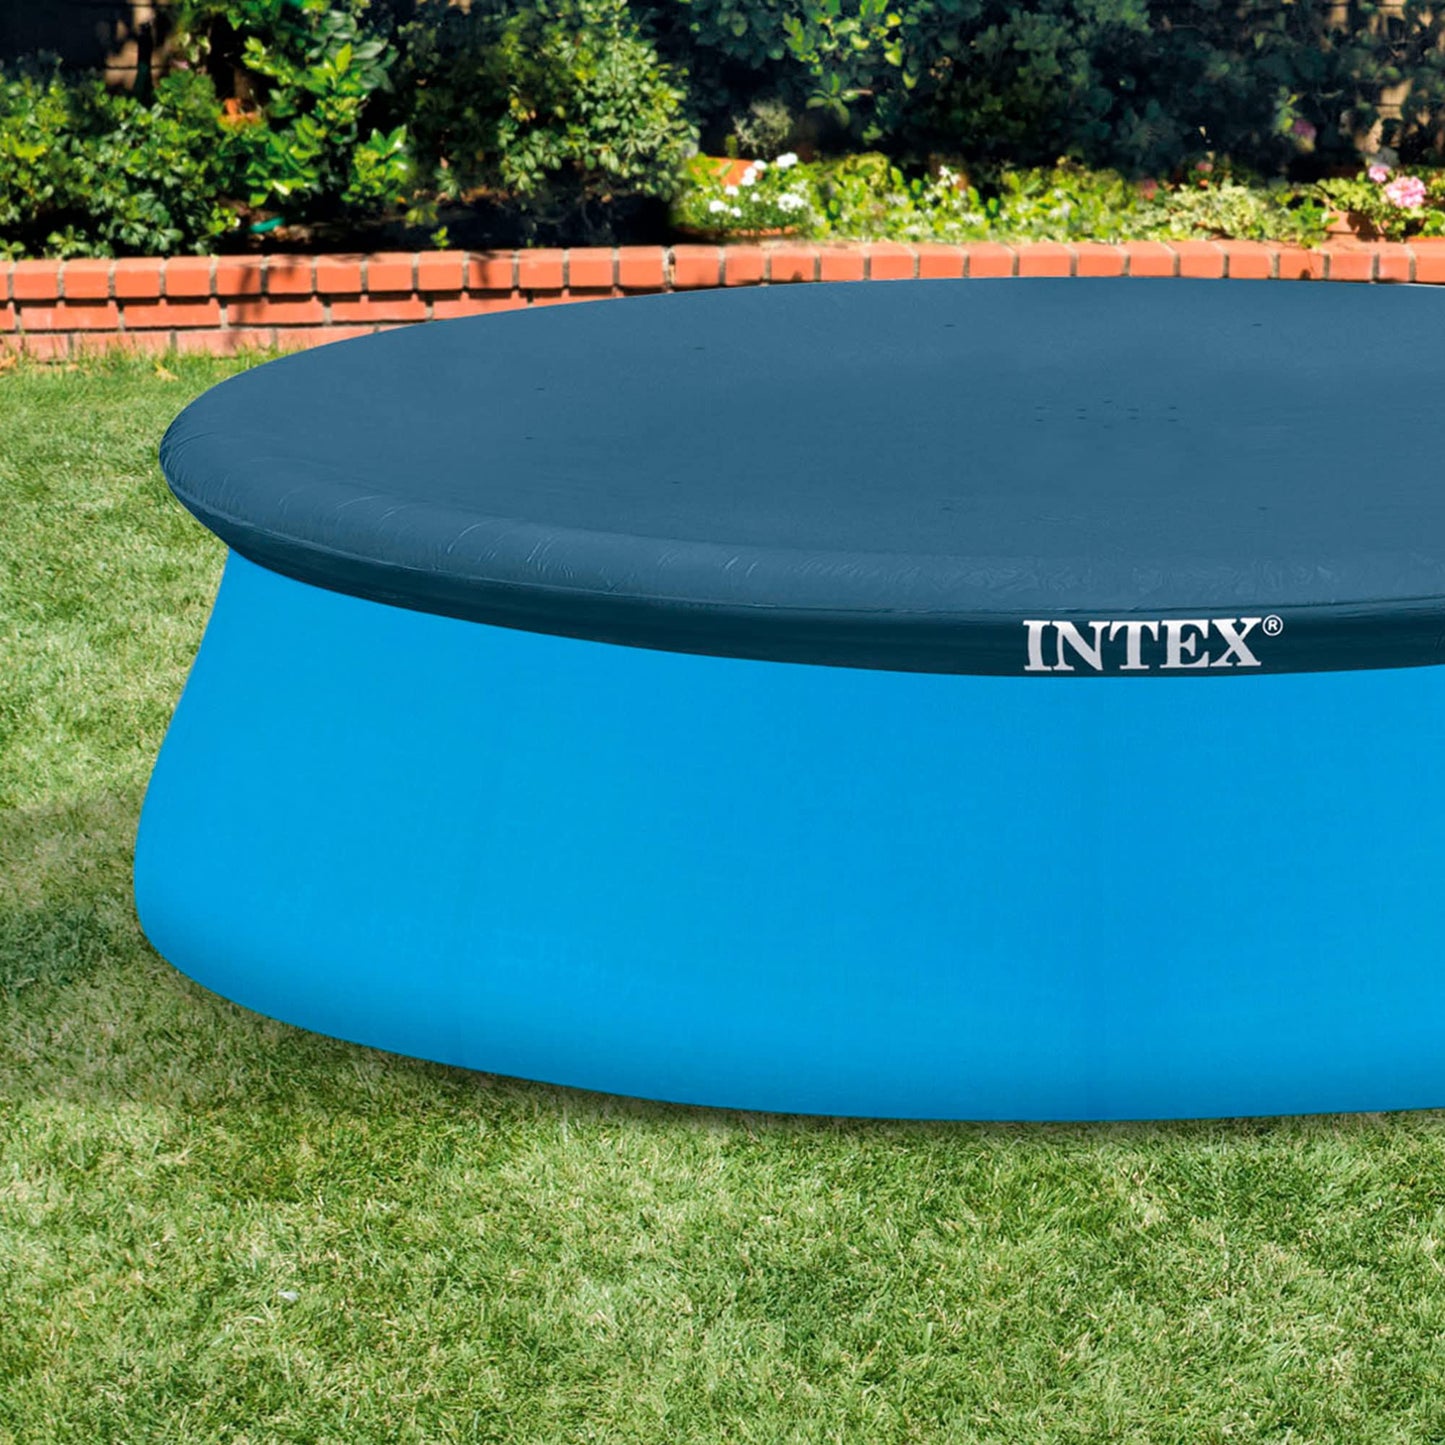 INTEX 28020E Intex 8-Foot Round Easy Set Pool Cover with rope tie and drain holes